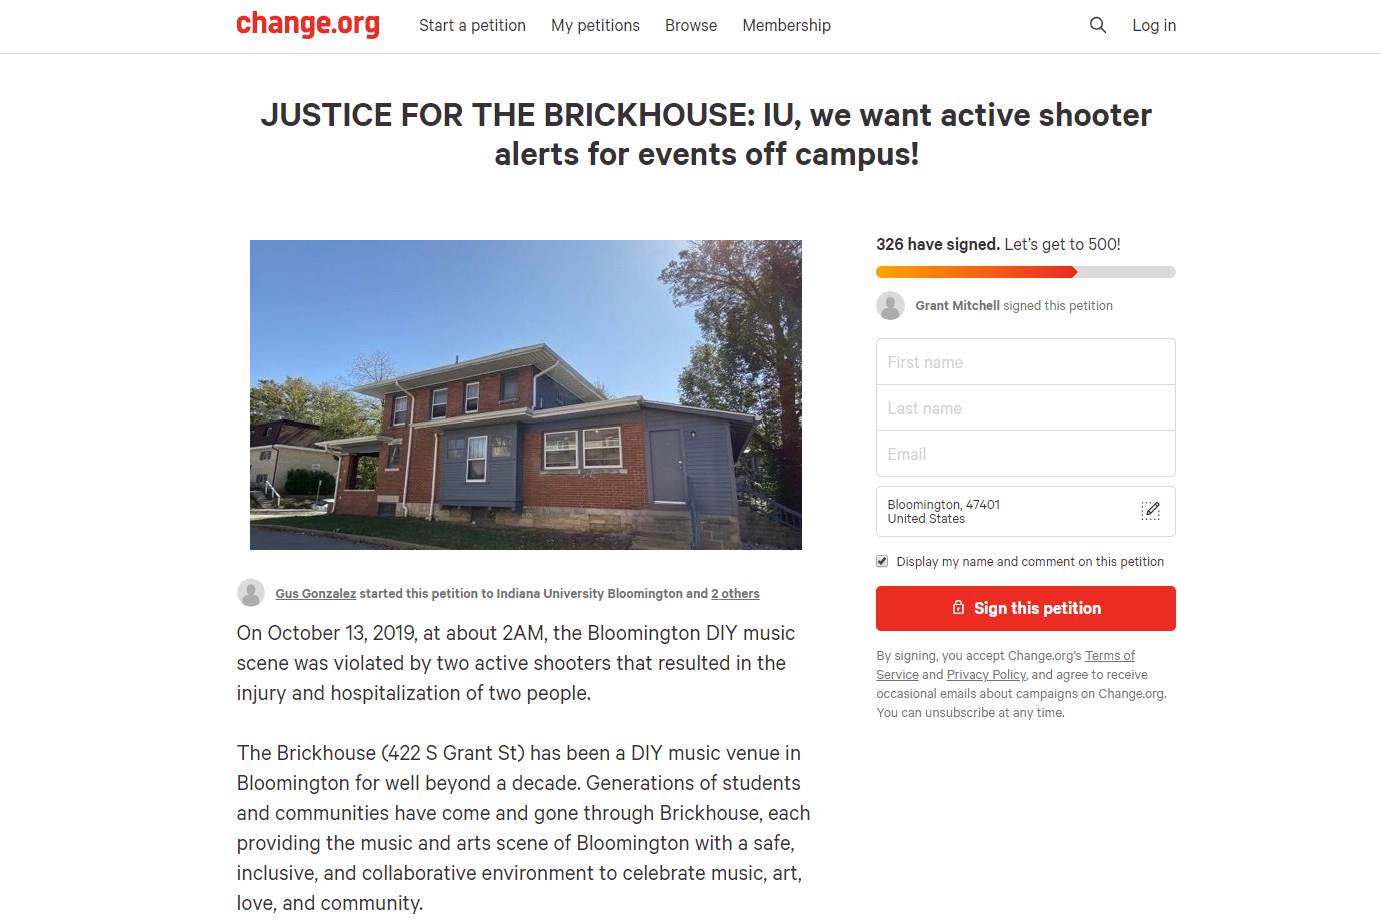 A screenshot of a petition on Change.org asking for justice for tenants of an IU house party where a shooting happened.